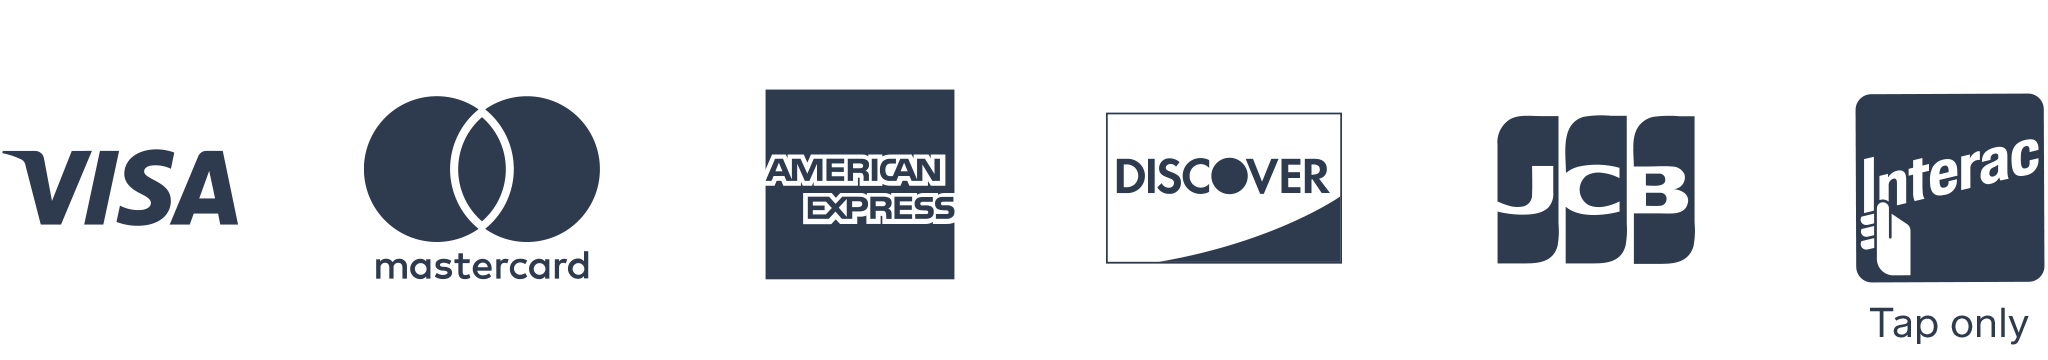 American Express Visa MasterCard Logo - Accepted Cards. Square Support Centre